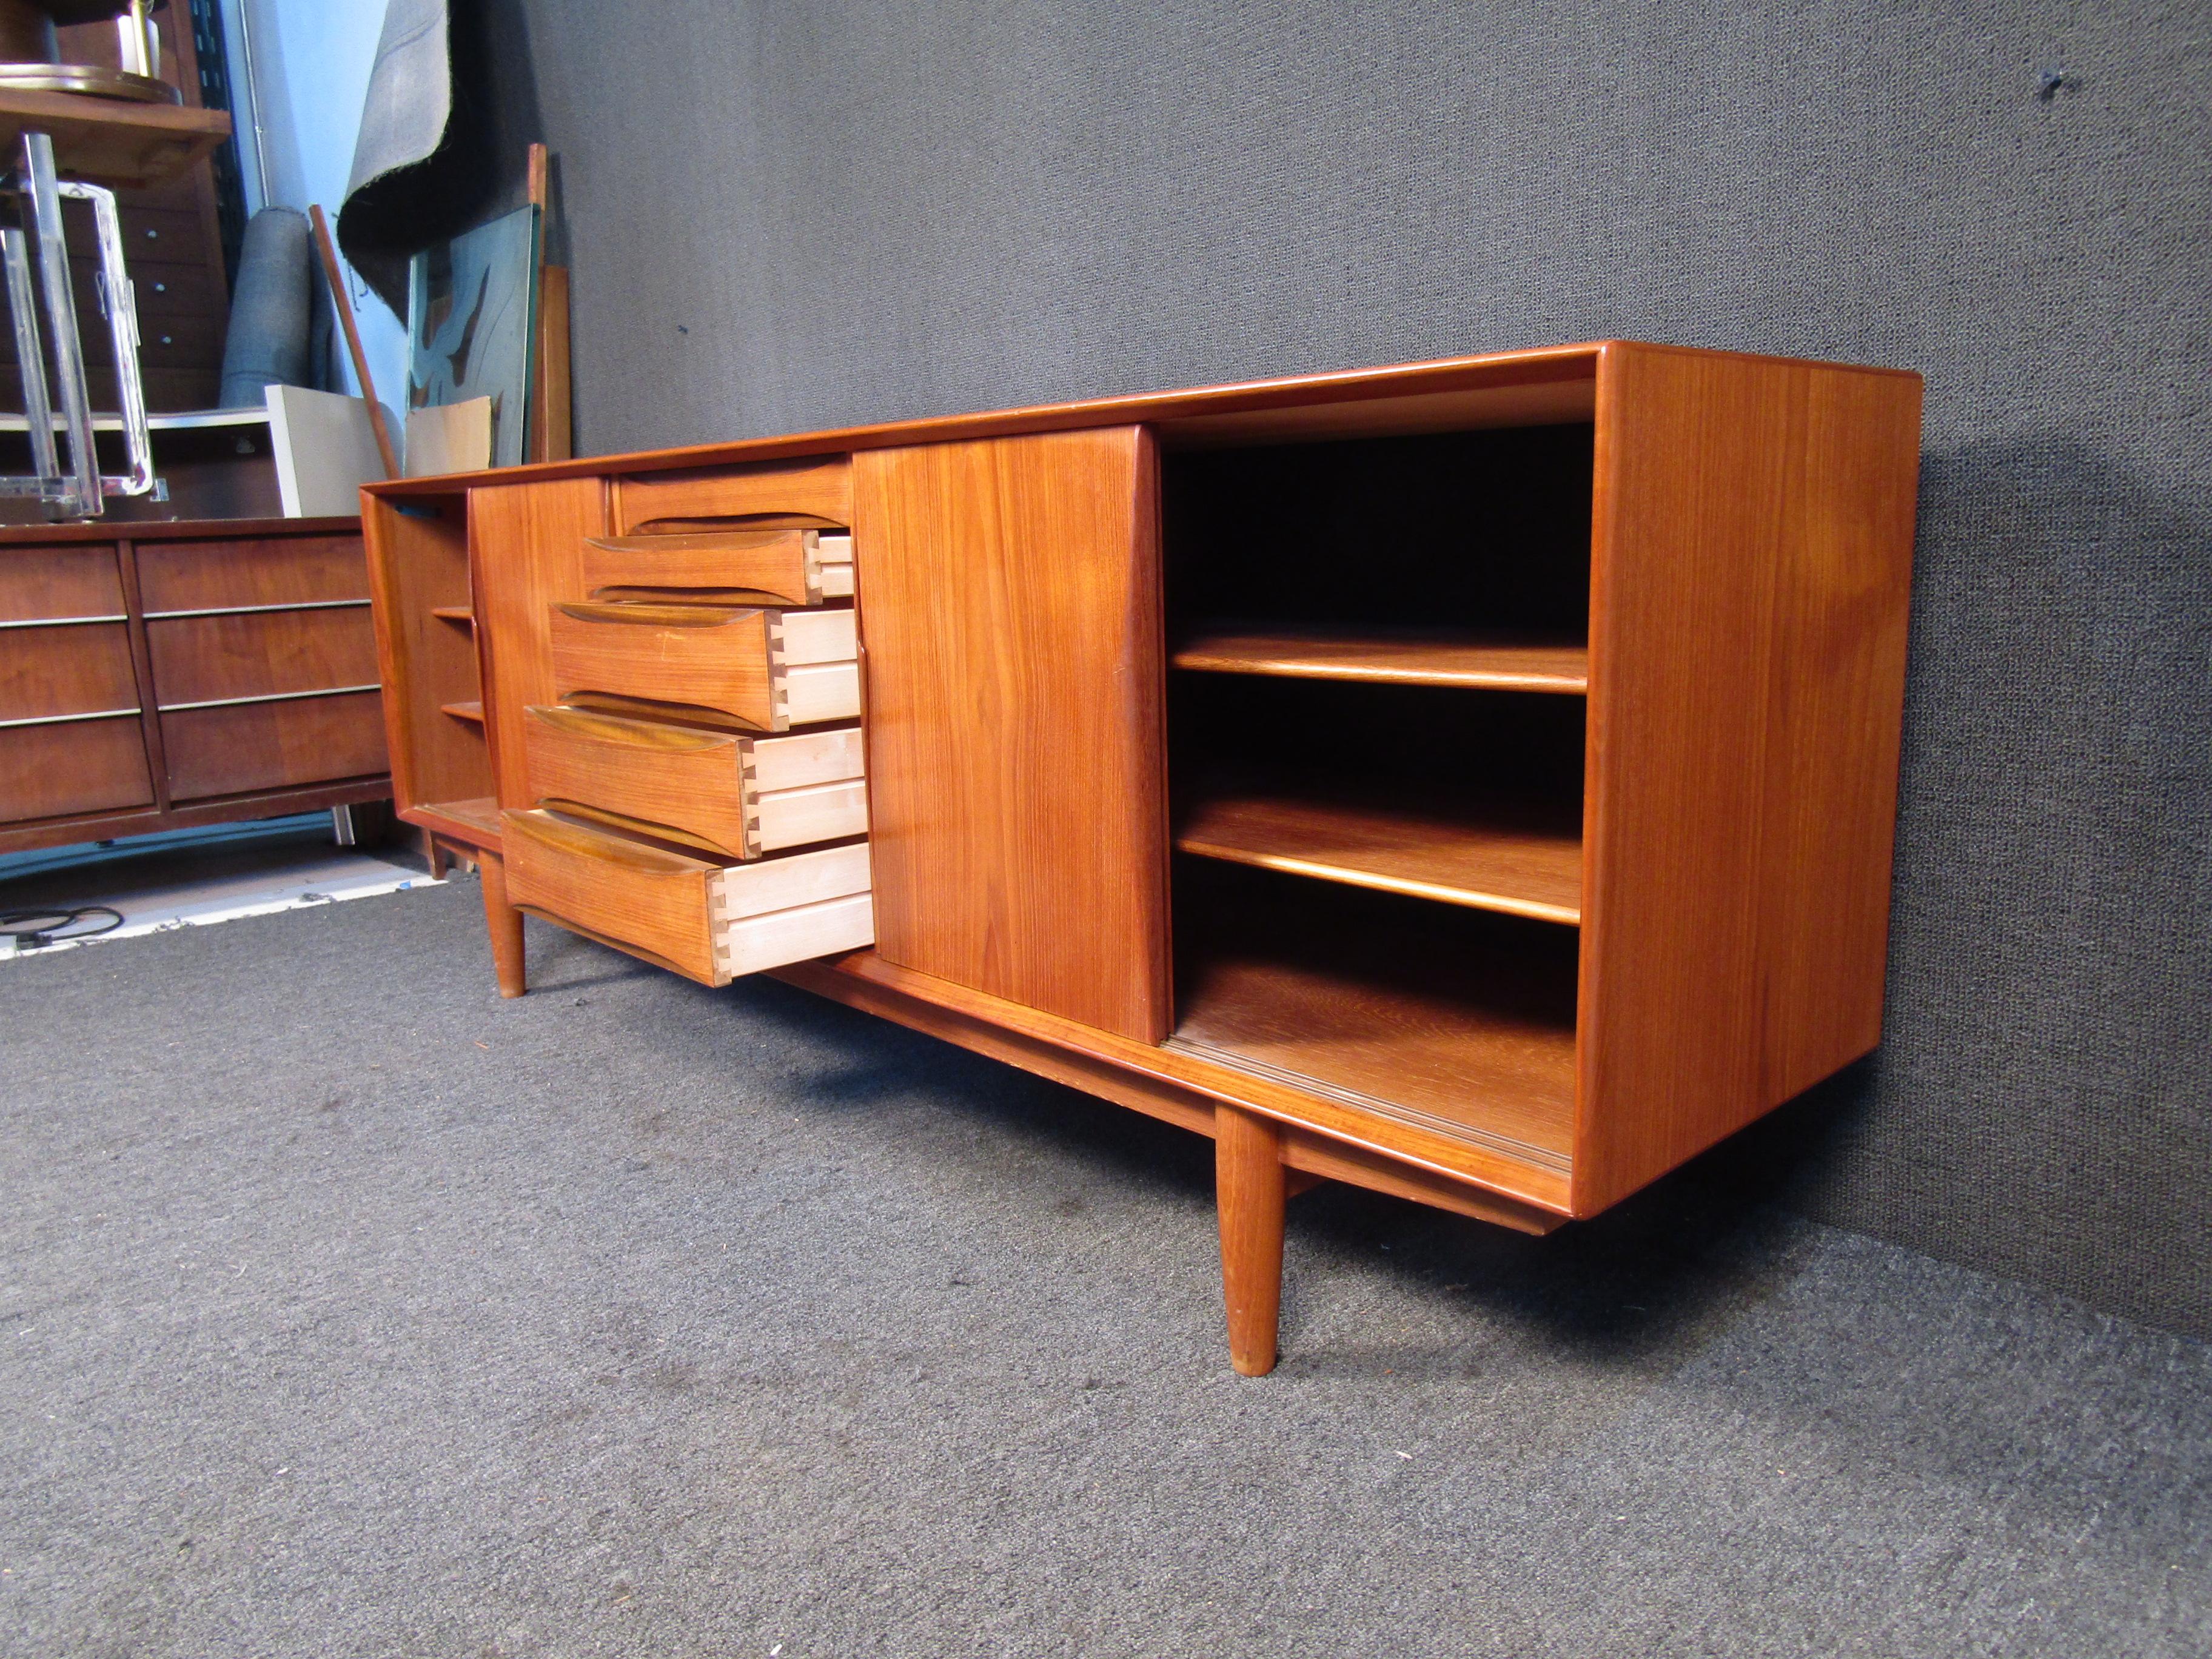 Vintage Danish Credenza by Dyrlund In Good Condition For Sale In Brooklyn, NY